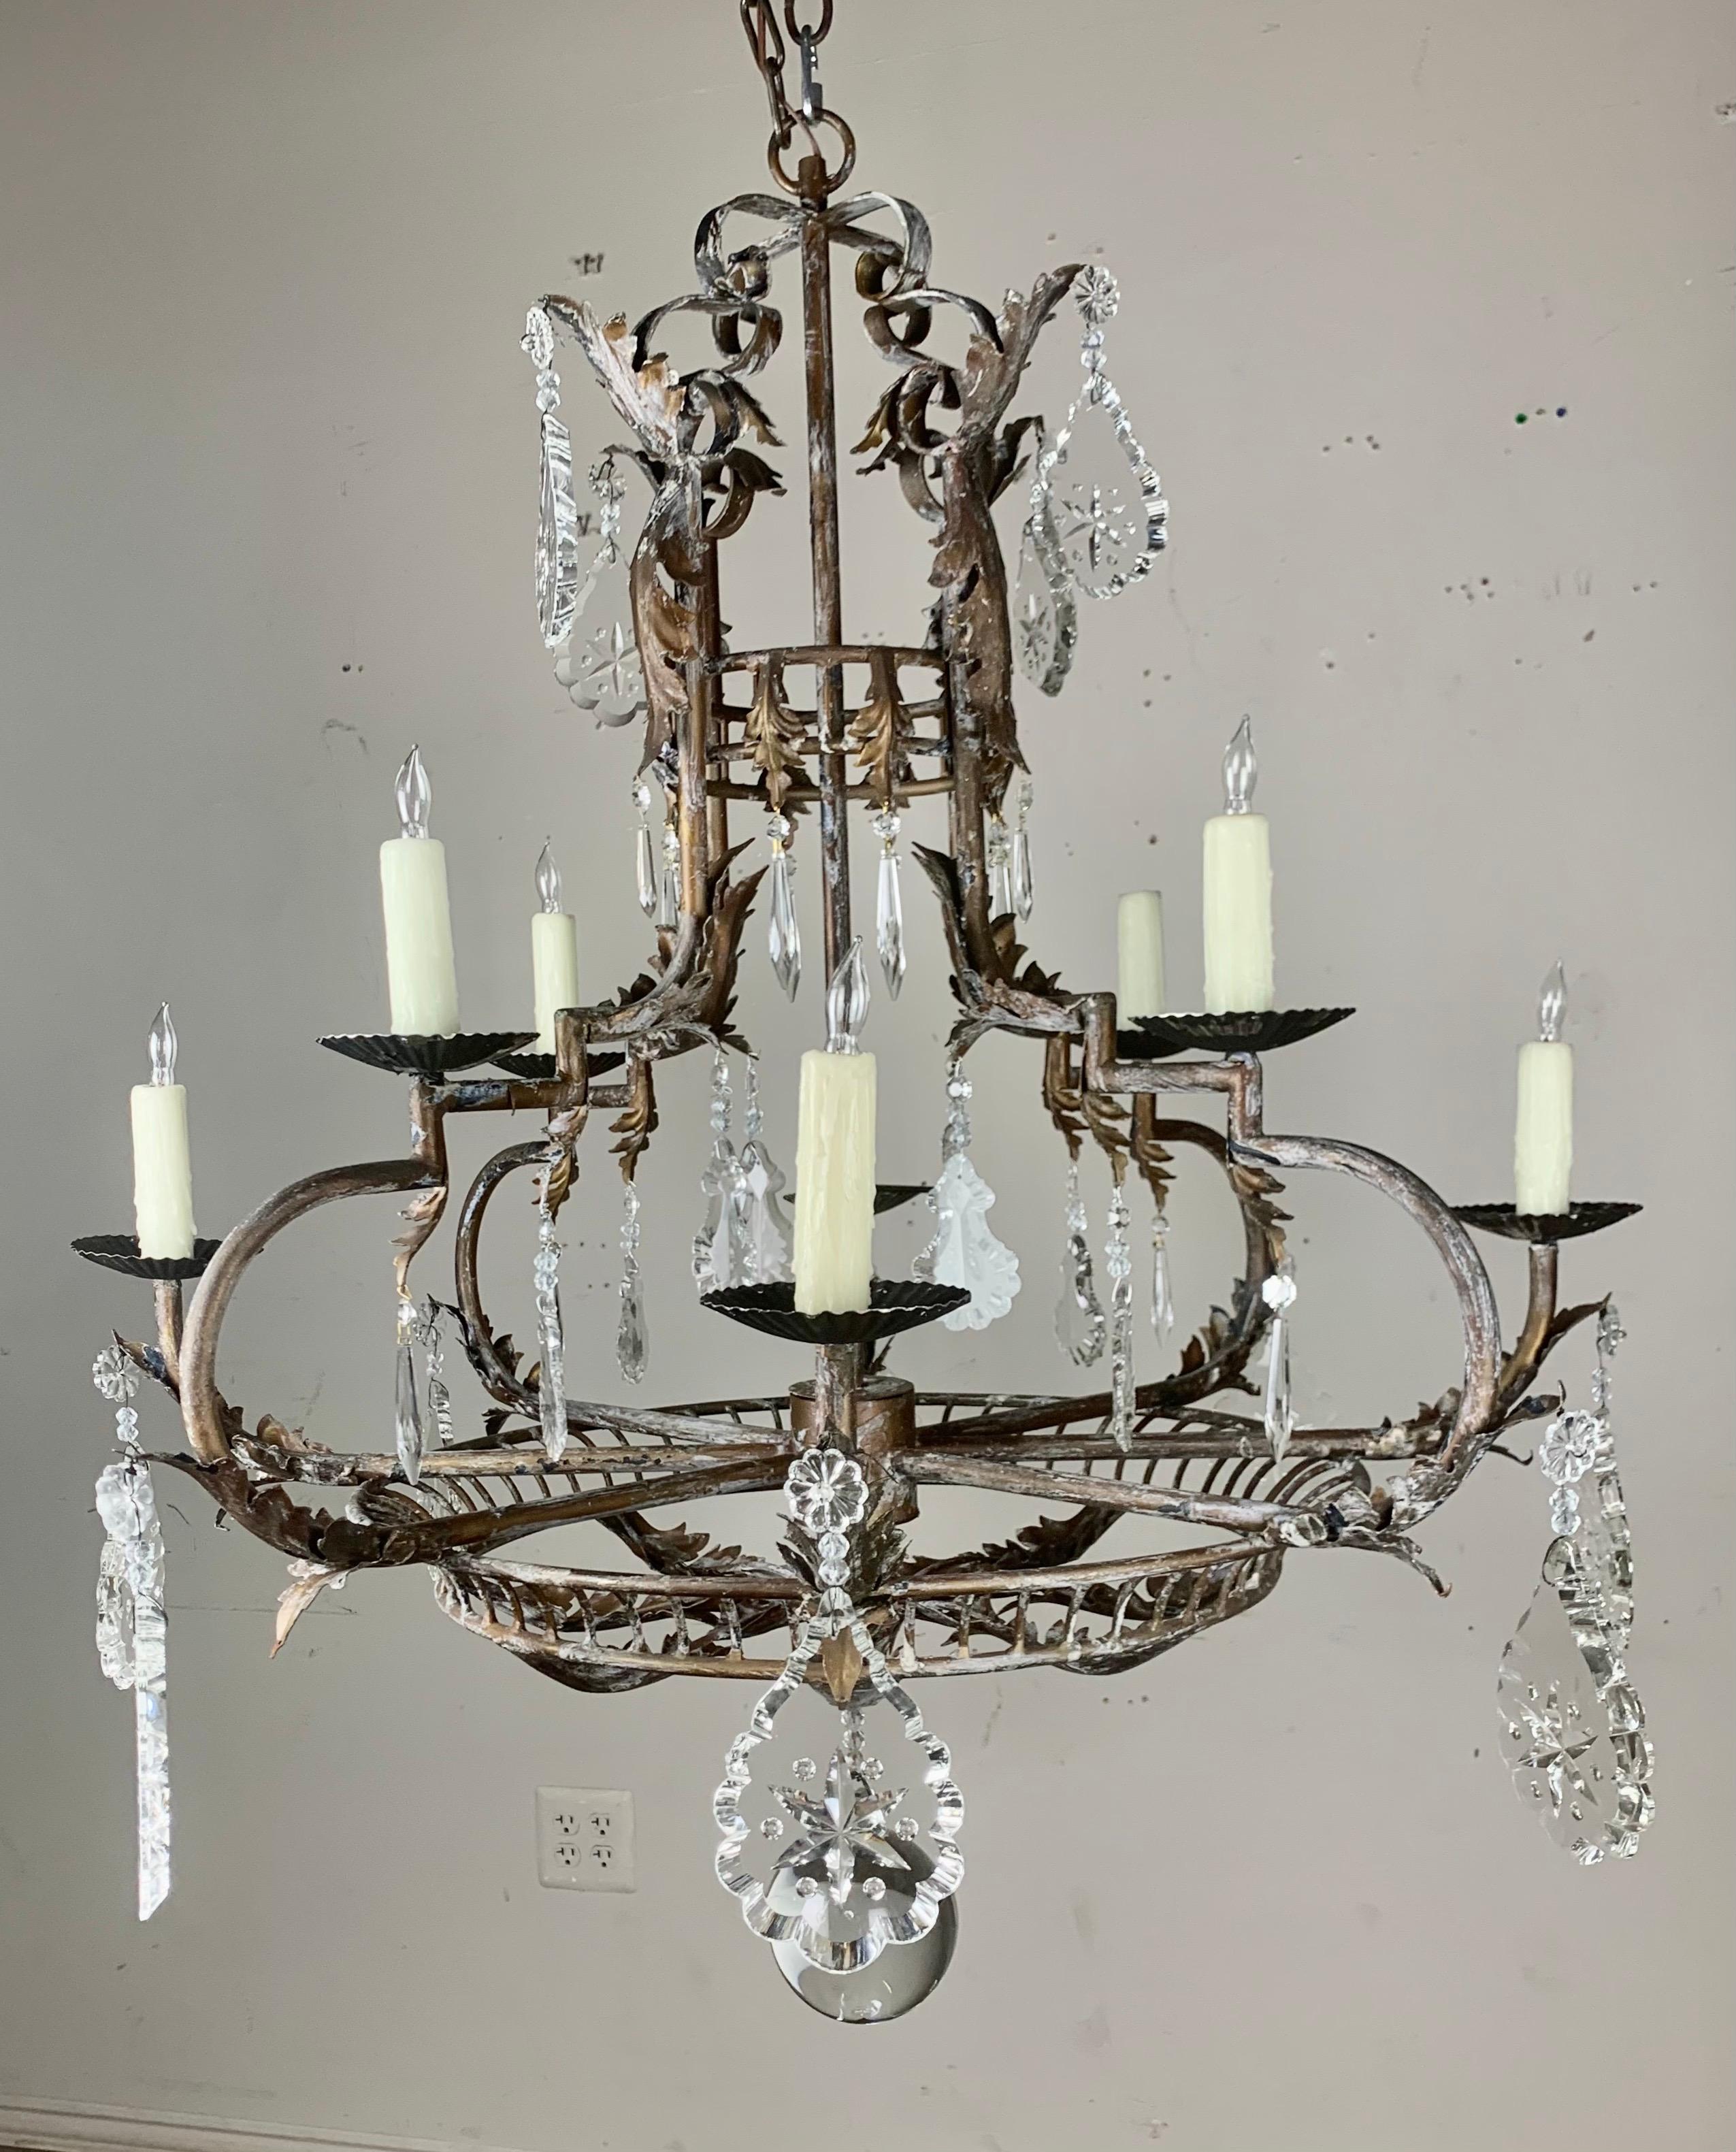 Spanish wrought iron eight light chandelier with etched crystals throughout. The fixture is newly rewired with drip wax candle covers. Chain & canopy included.